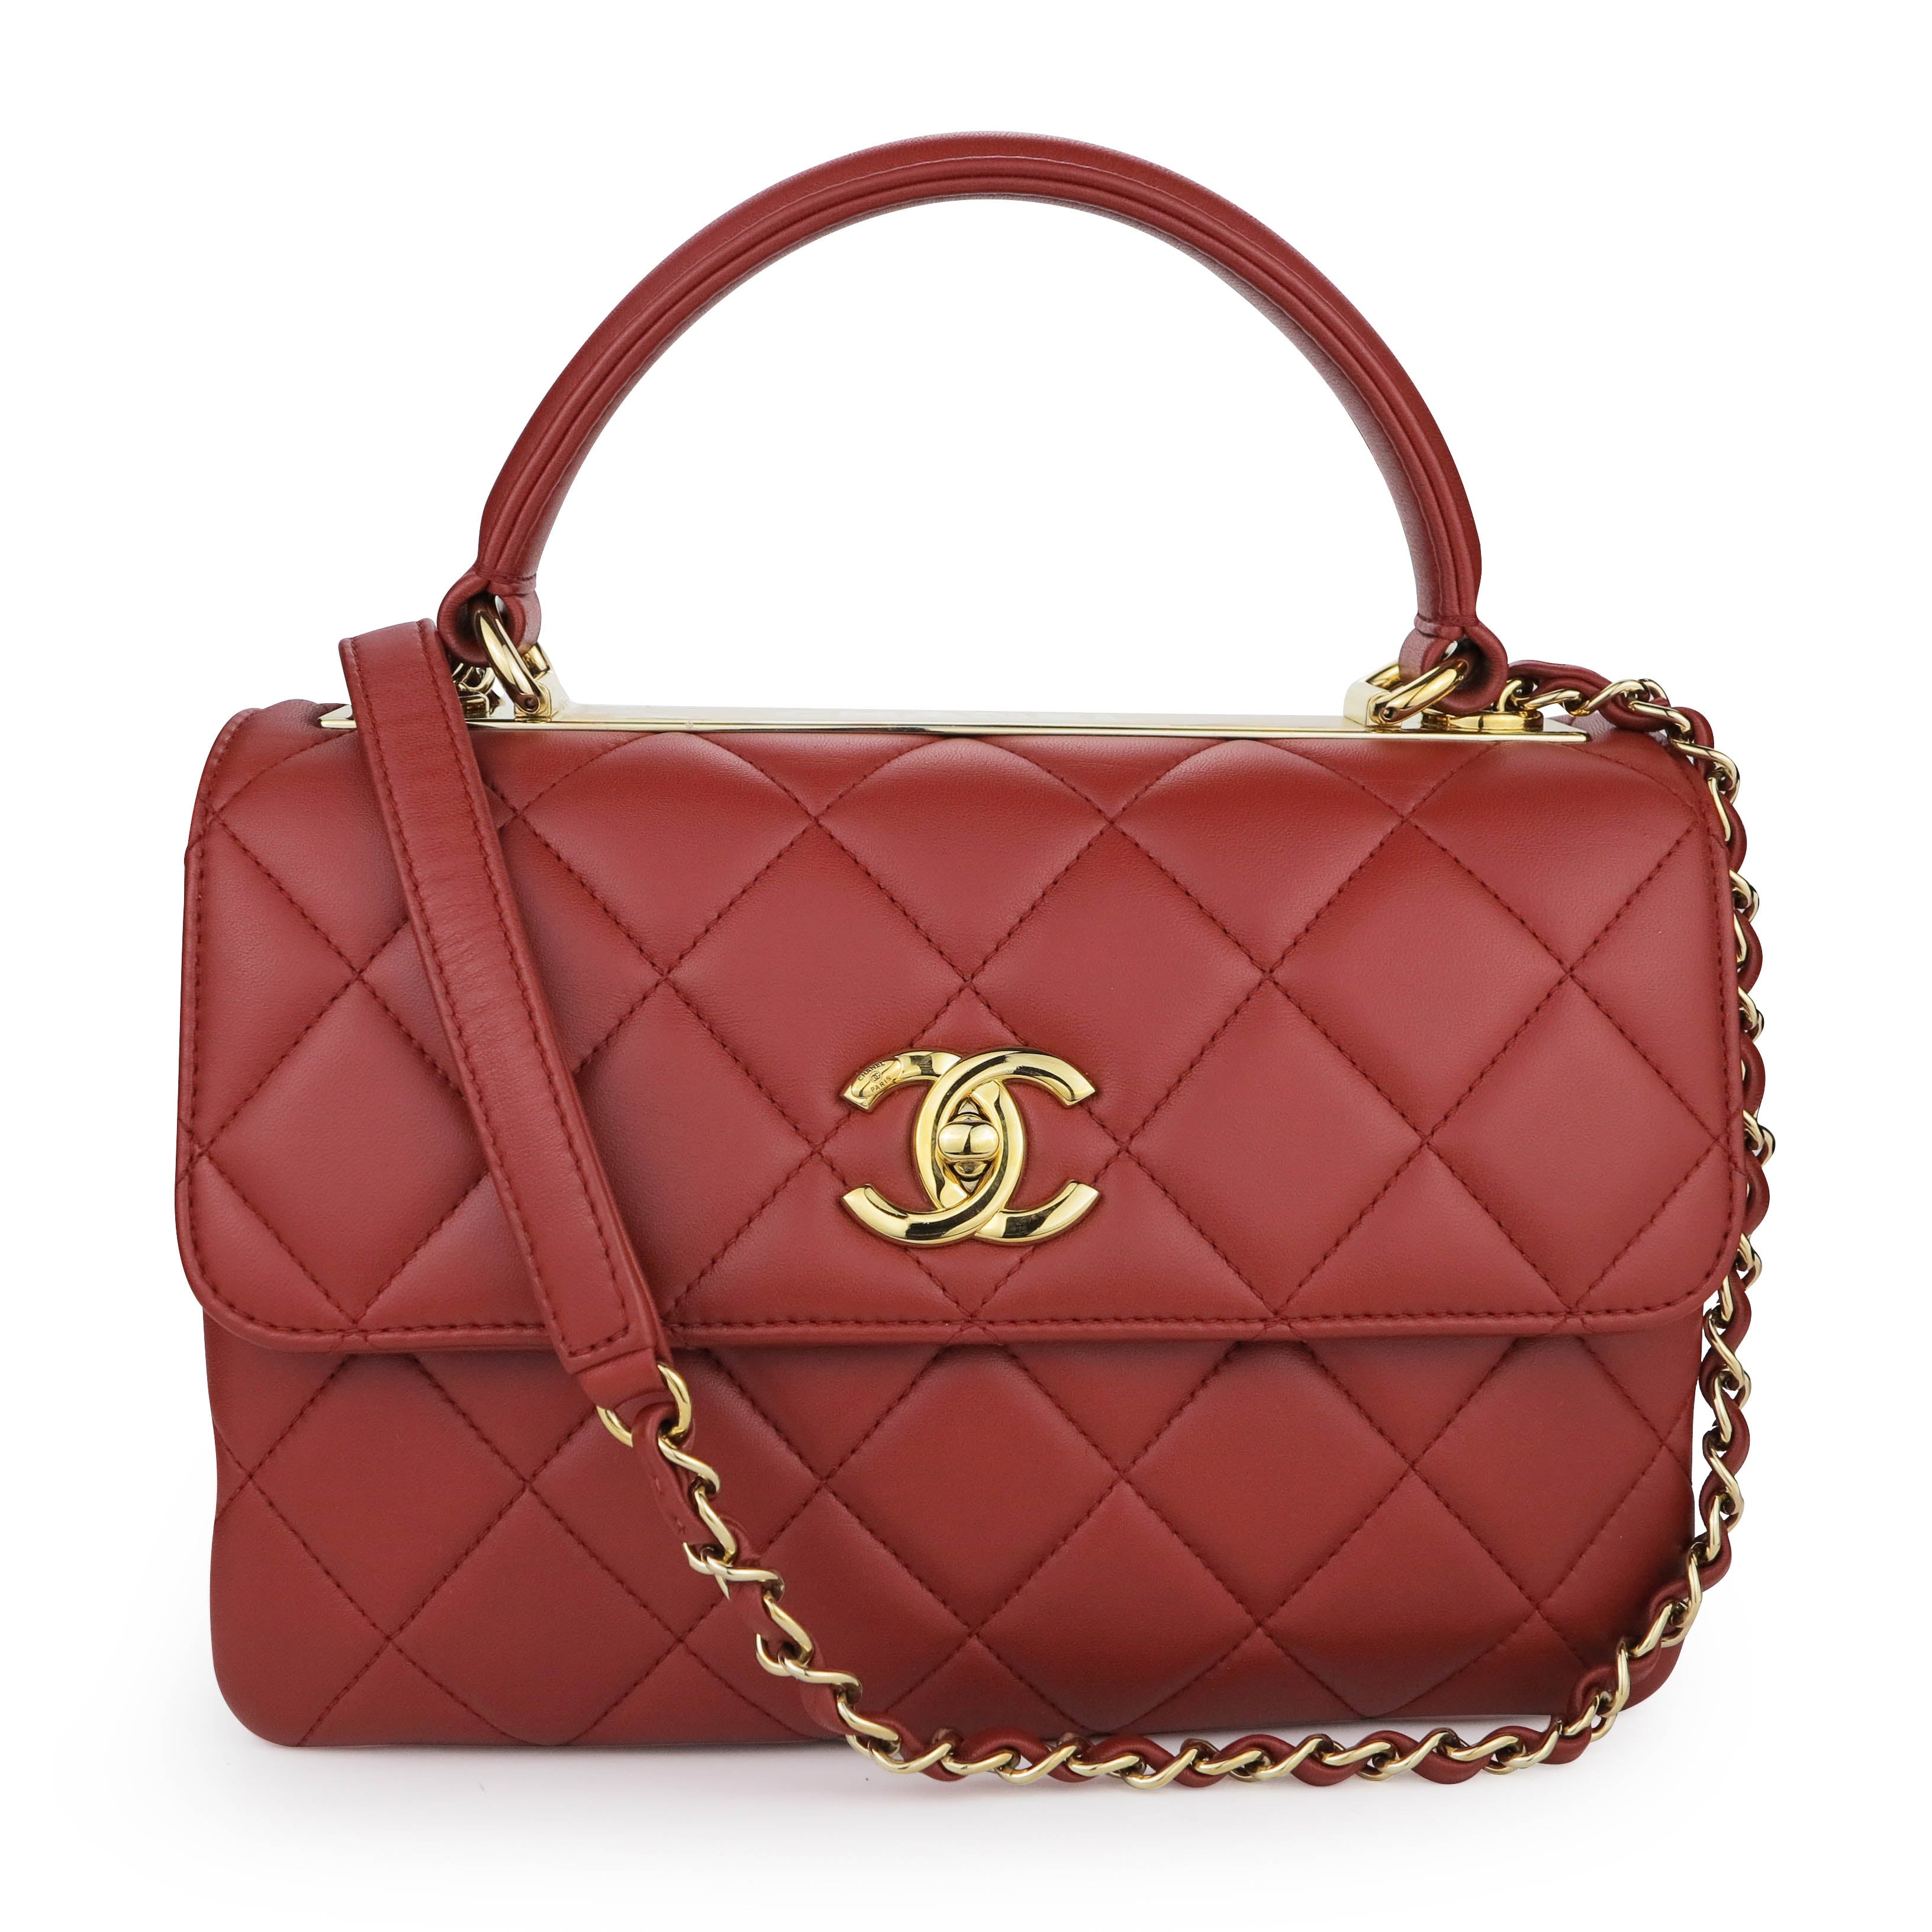 CHANEL Small Trendy CC Flap Bag with Top Handle in Red Lambskin